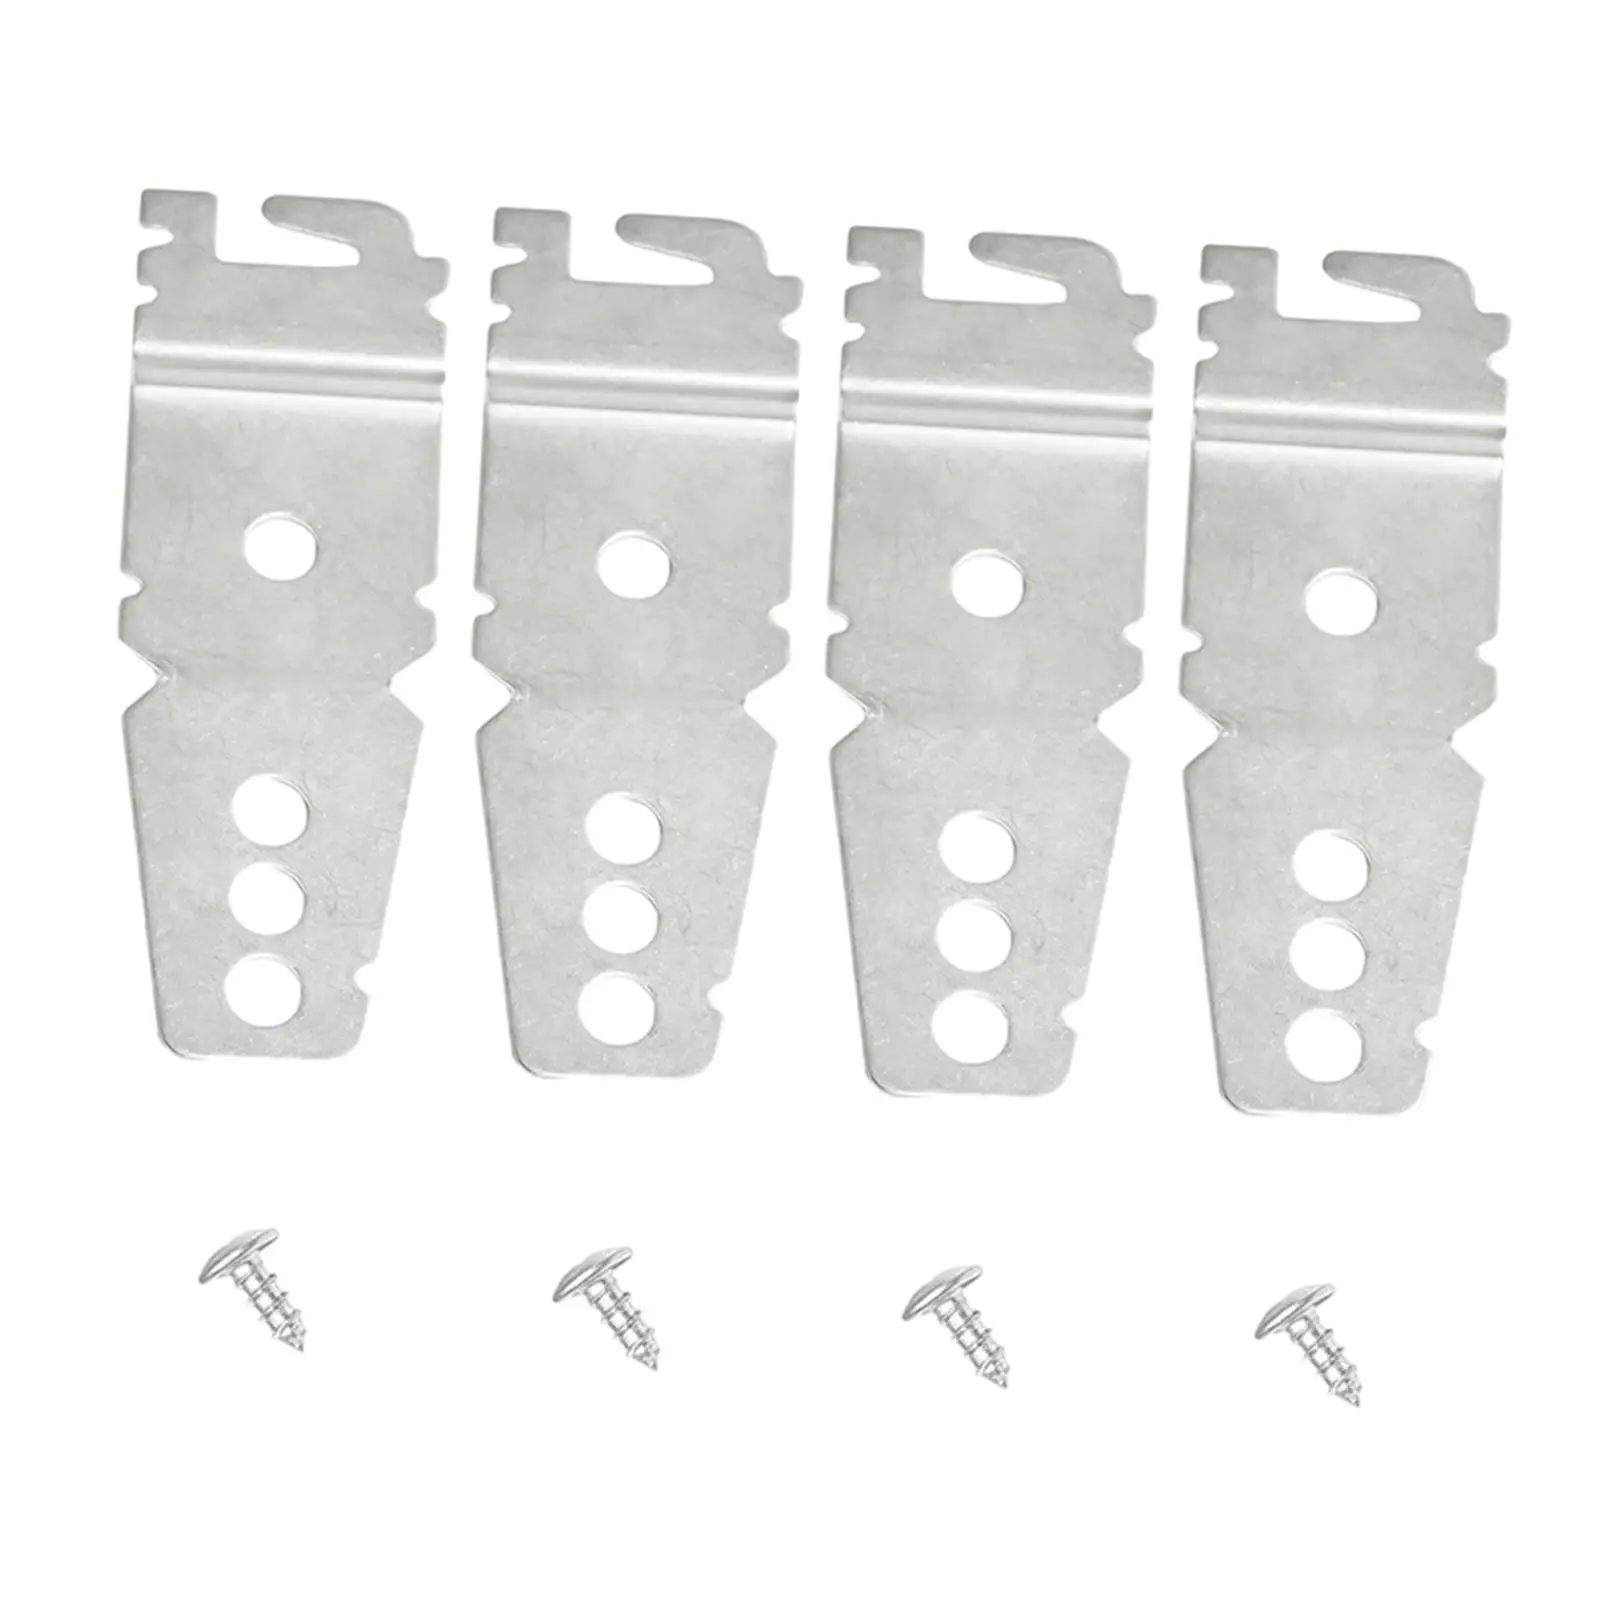 4 Pieces 8269145 Dishwasher Mounting Bracket Stable Performance with Screws Parts Replacements for WP8269145 AP3039168 PS393134